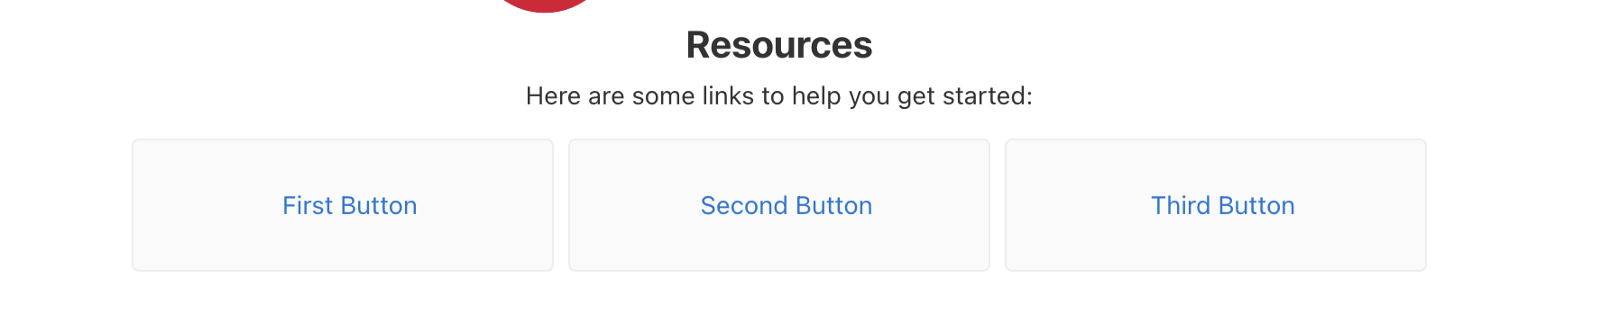 Resources page, Here are some links to help you get started, then three buttons  (First Button, Second Button, Third Button).